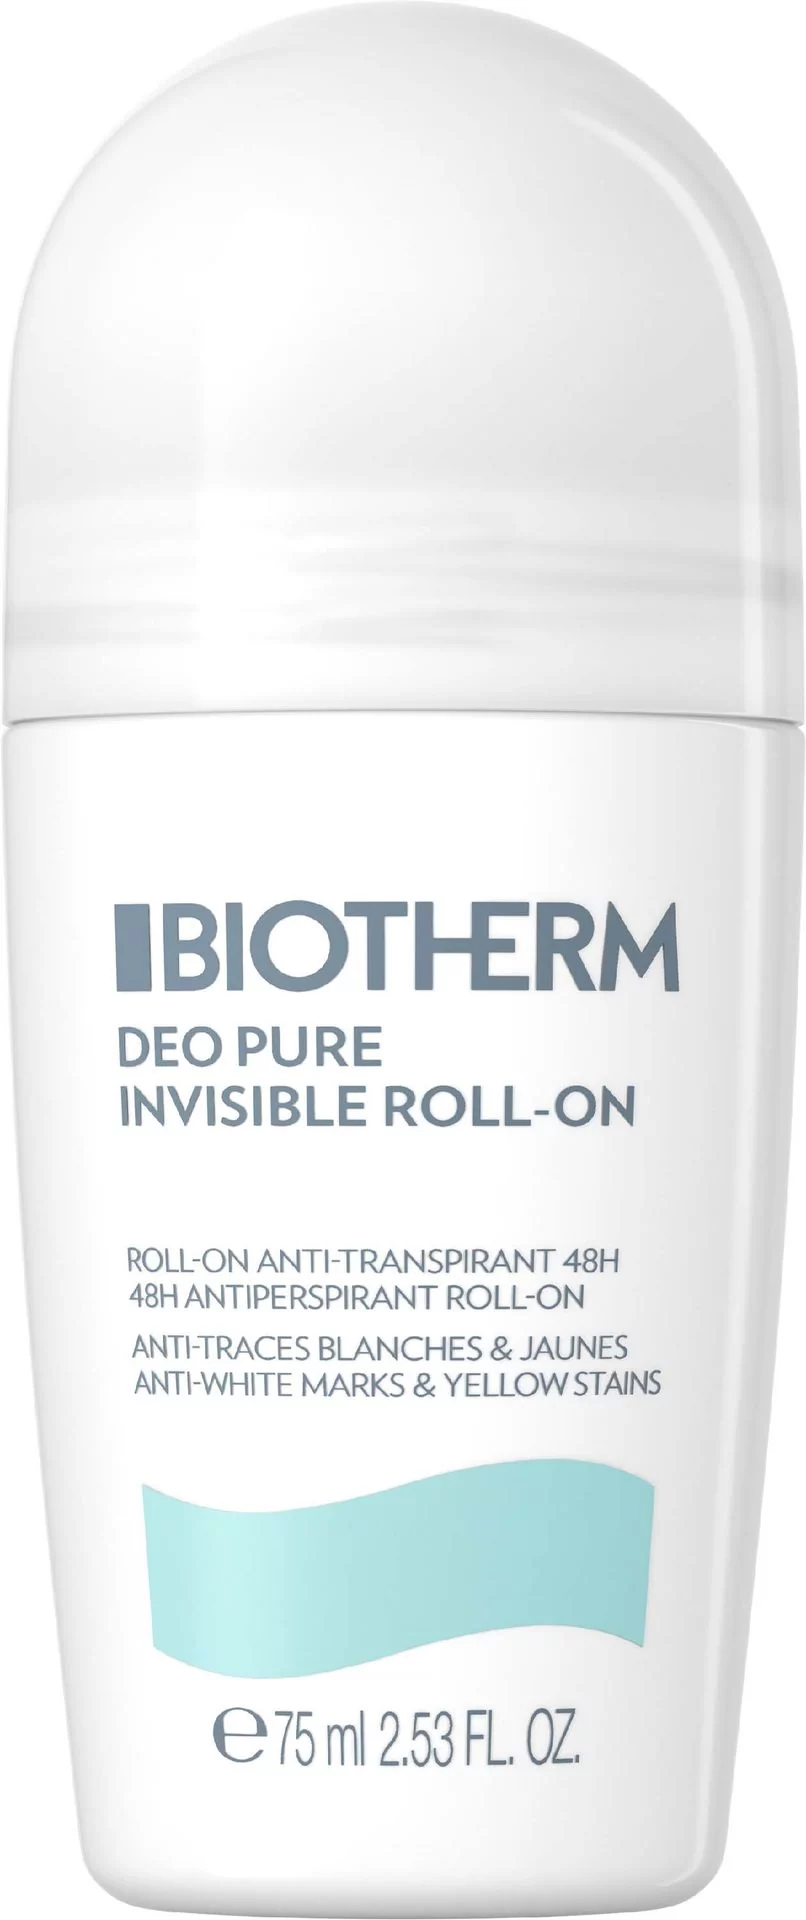 Biotherm Deo Pure Invisible 75ml